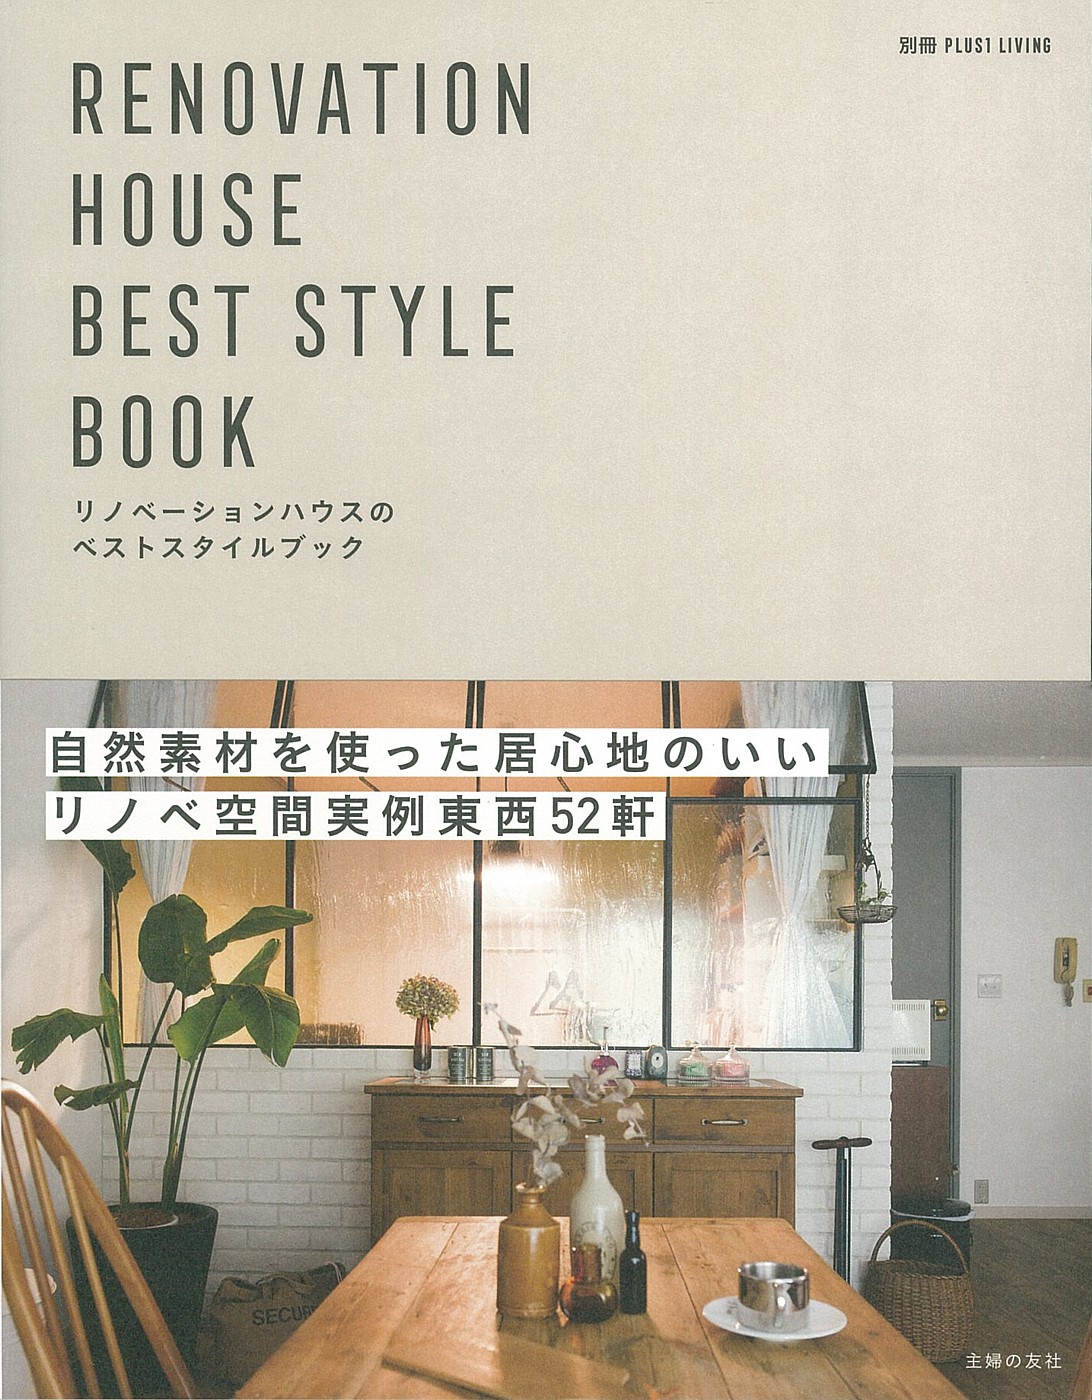 RENOVATION HOUSE BEST STYLE BOOK